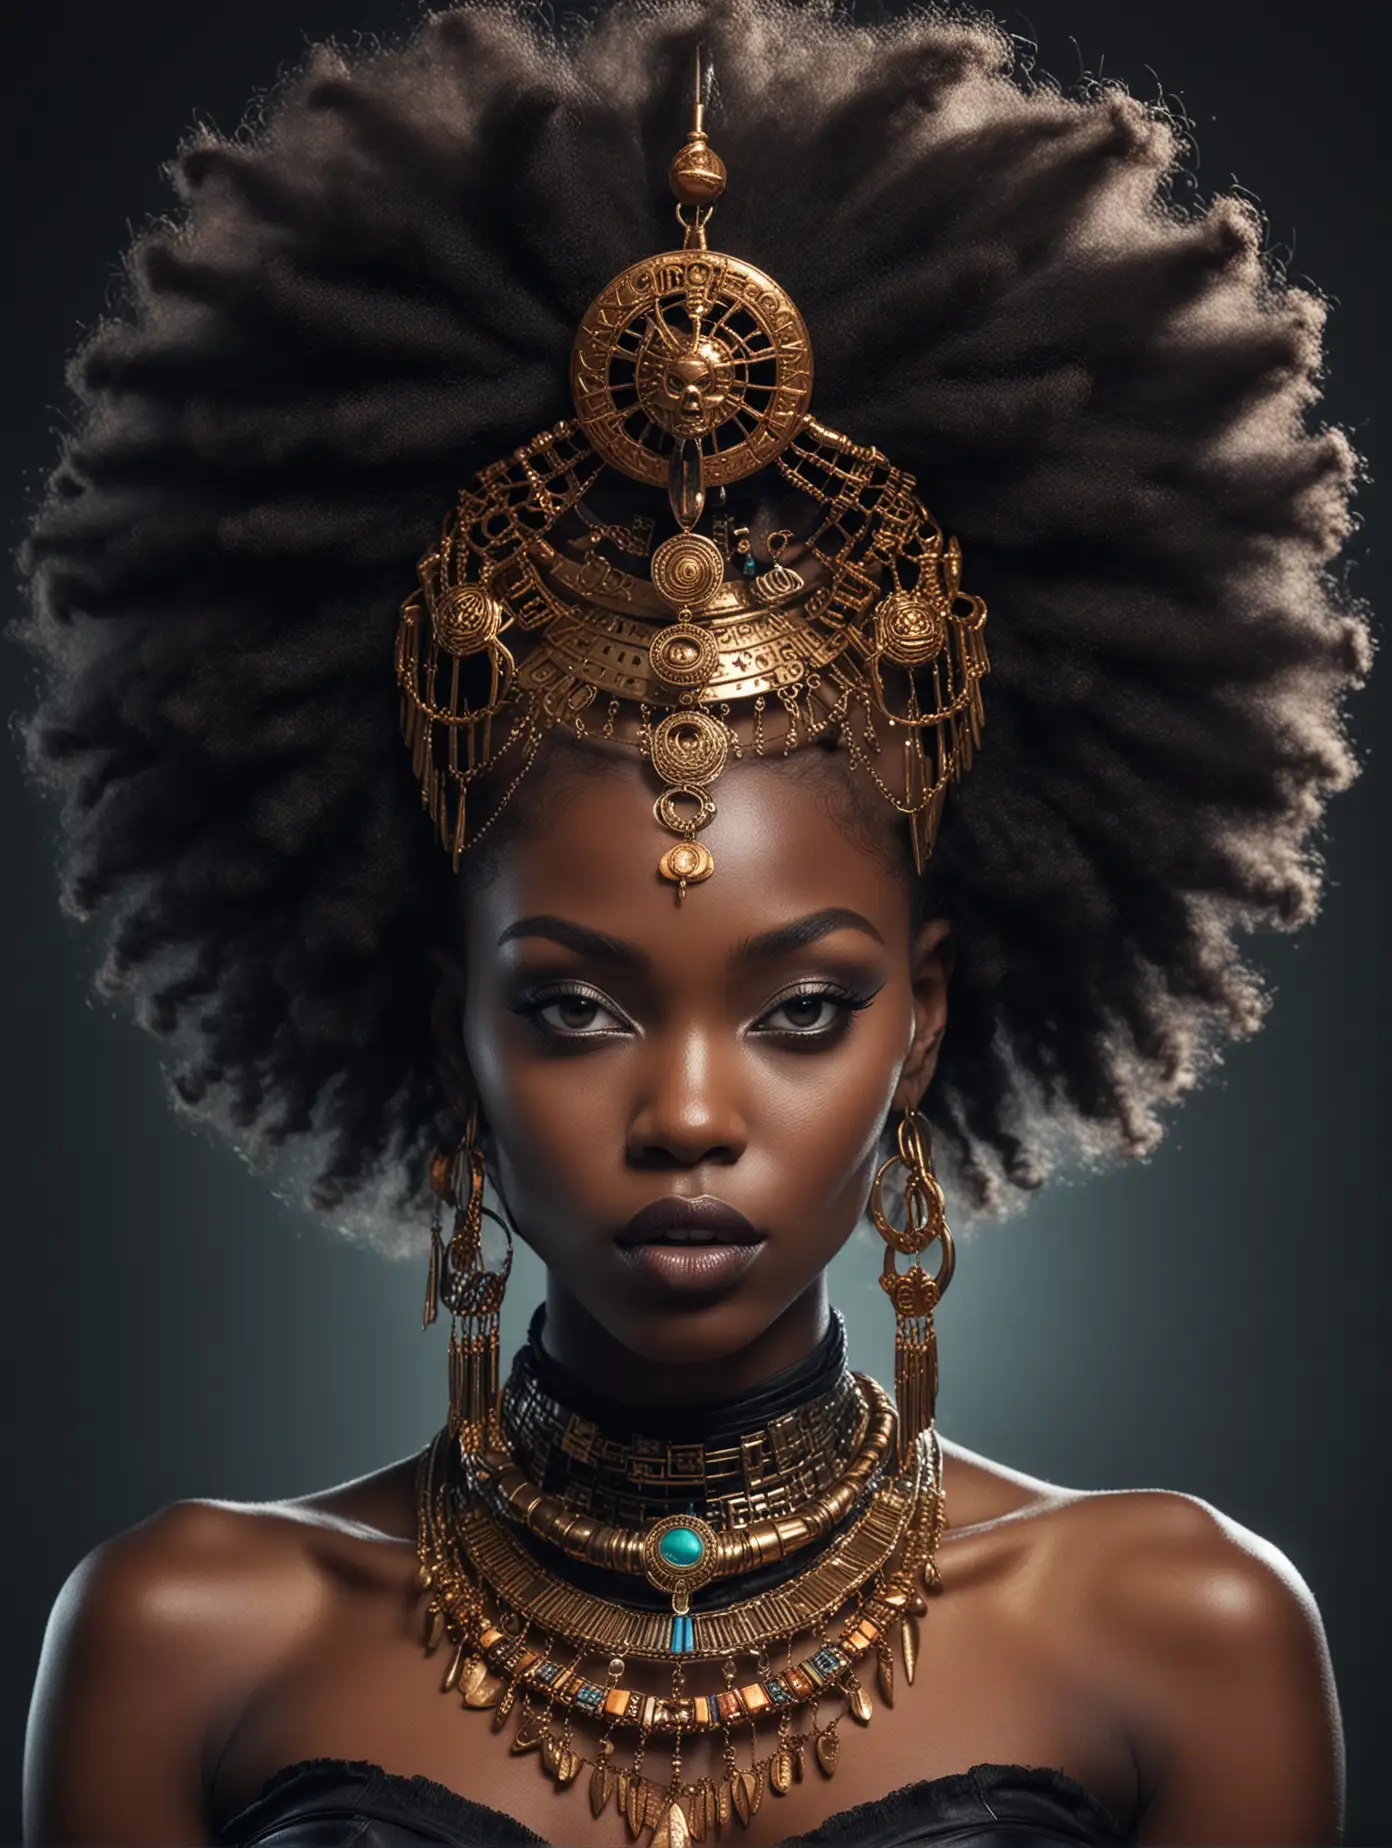 AFRO FUTURISTIC LADY WITH AFRICAN JEWELLERY AND A HALLOWEEN SPOOKY FEEL TO THE IMAGE